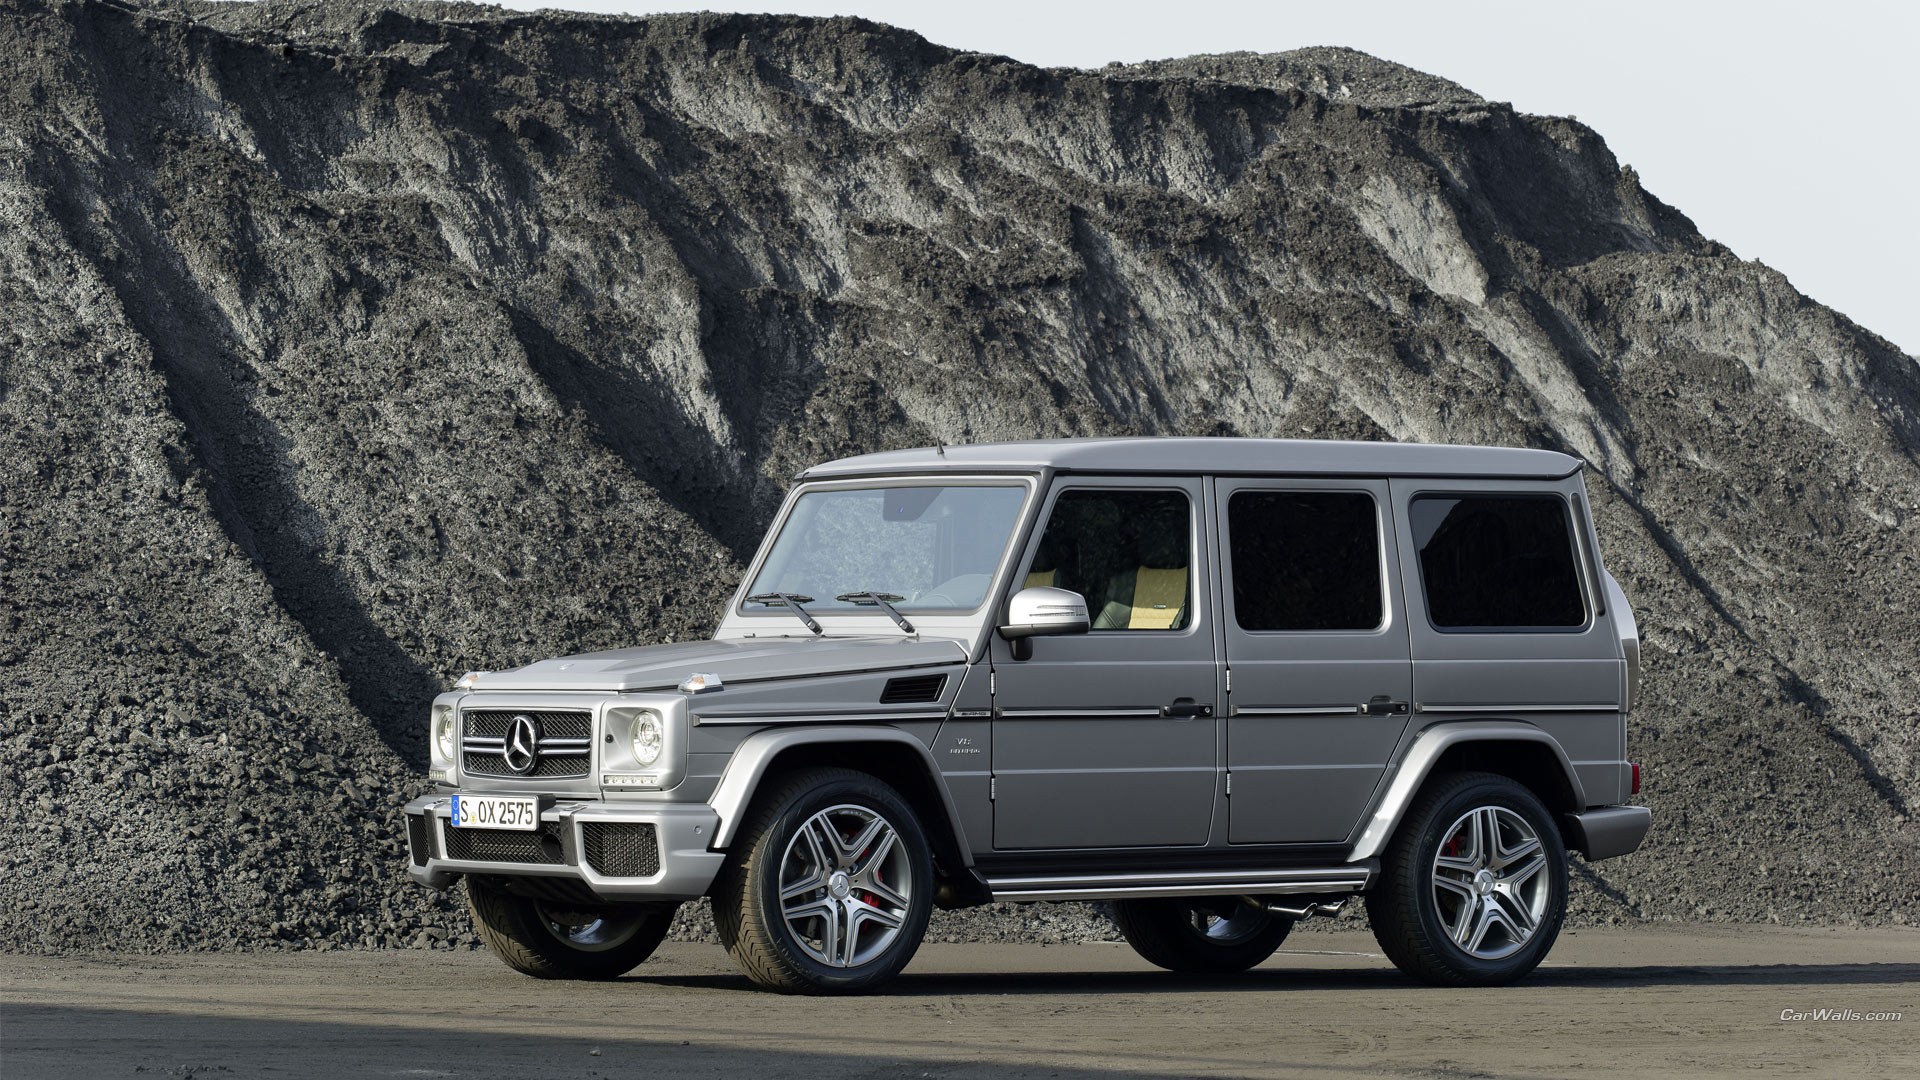 General 1920x1080 Mercedes-Benz G-Class Mercedes-Benz silver cars vehicle car numbers SUV German cars